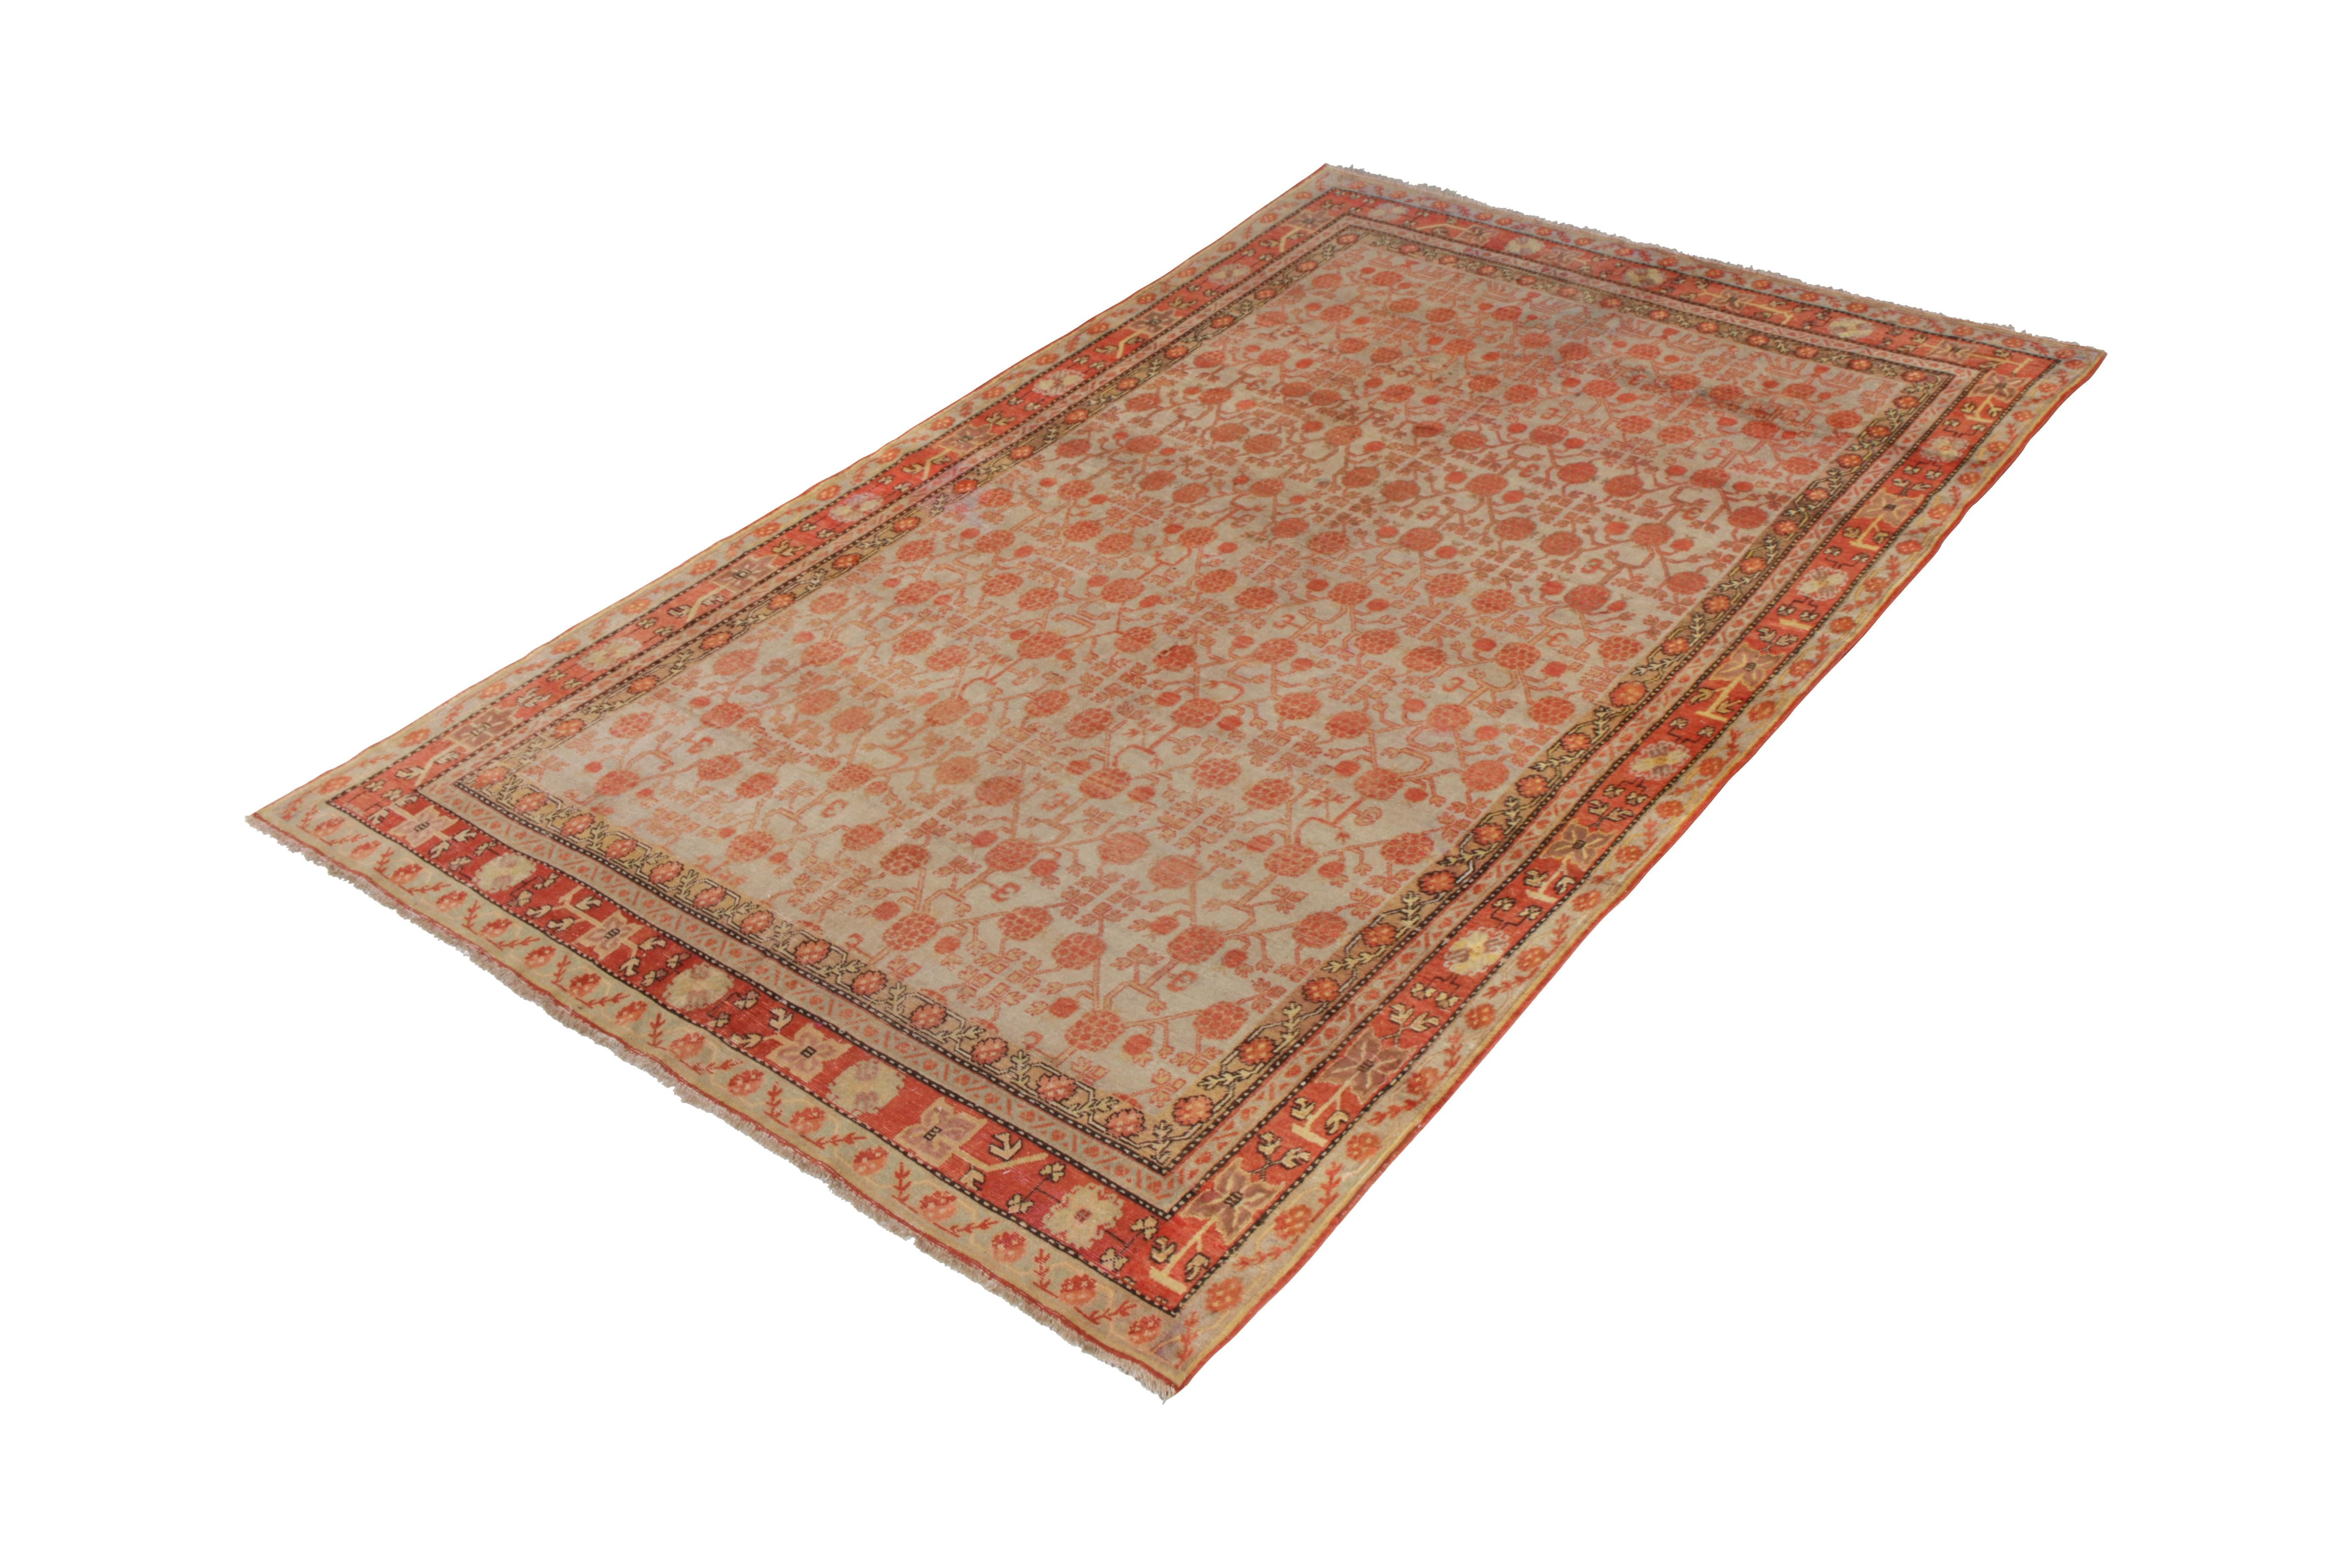 An 8 x 13 Khotan rug in red and blue, hand knotted in wool originating from East Turkestan, circa 1910-1920. This particular antique Khotan rug exemplifies ancestral pomegranate patterns in a smart sense of movement and cultured air. A rich variety